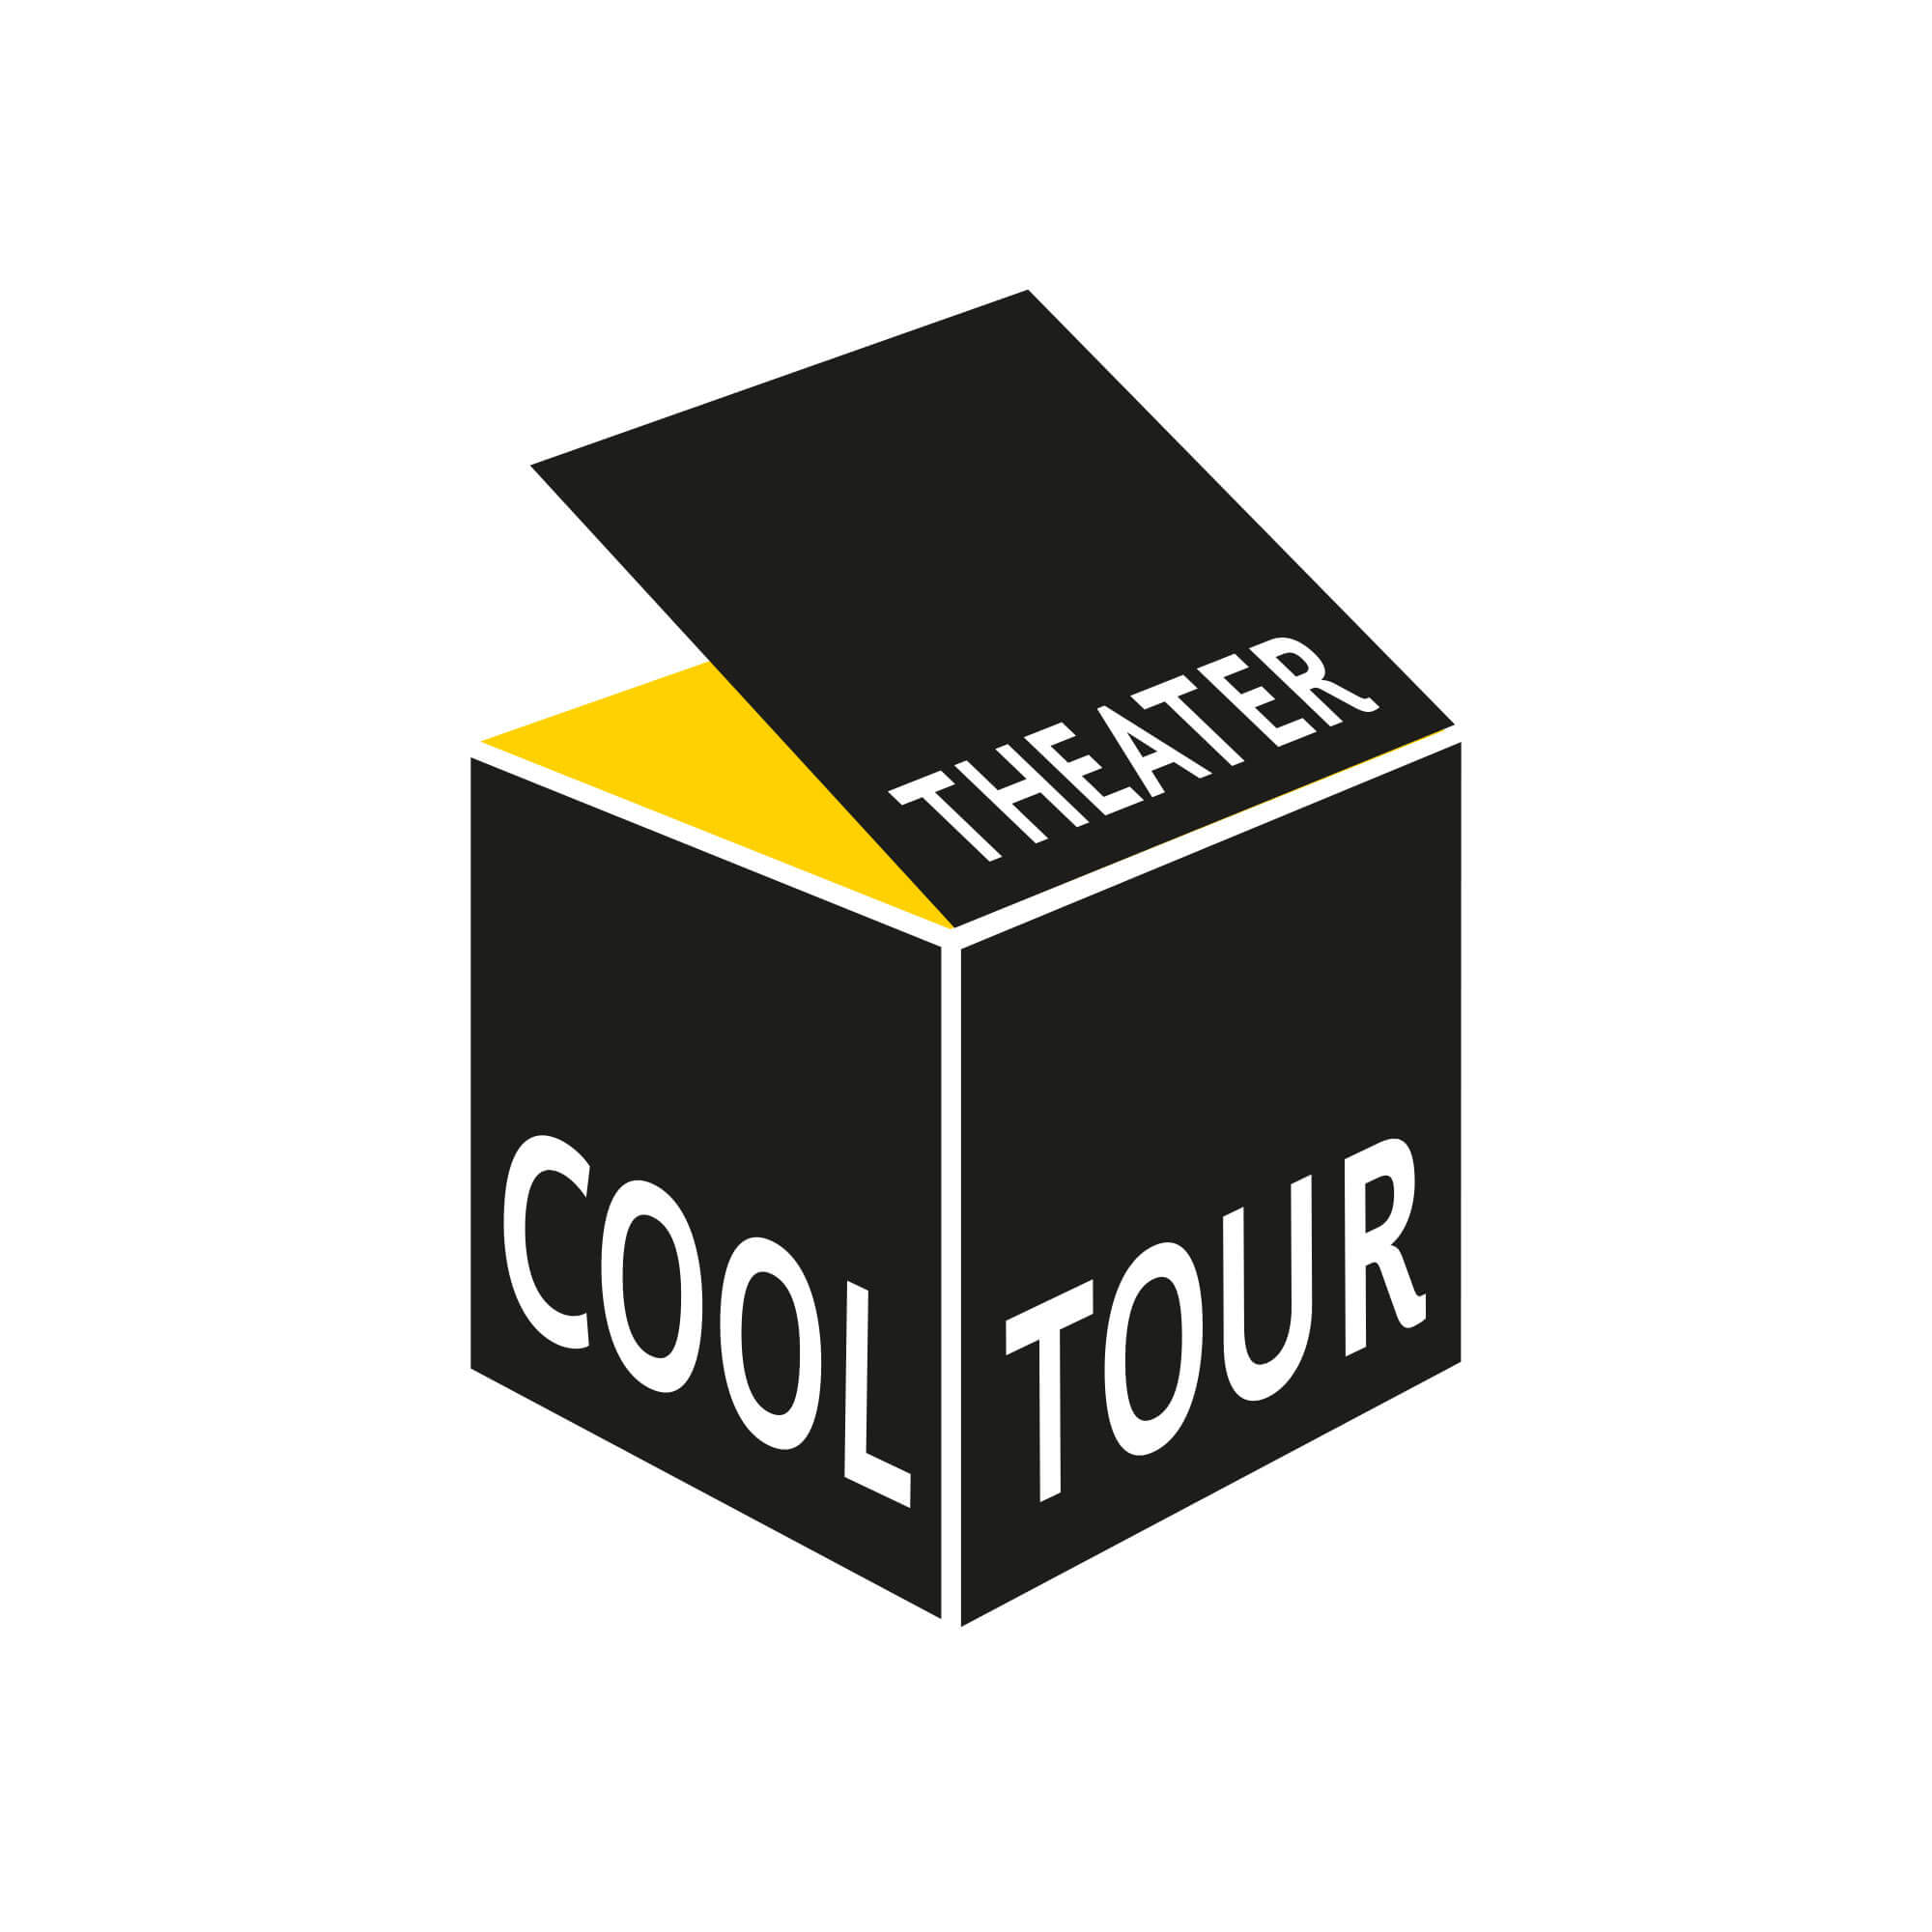 Theater Cooltour Logo